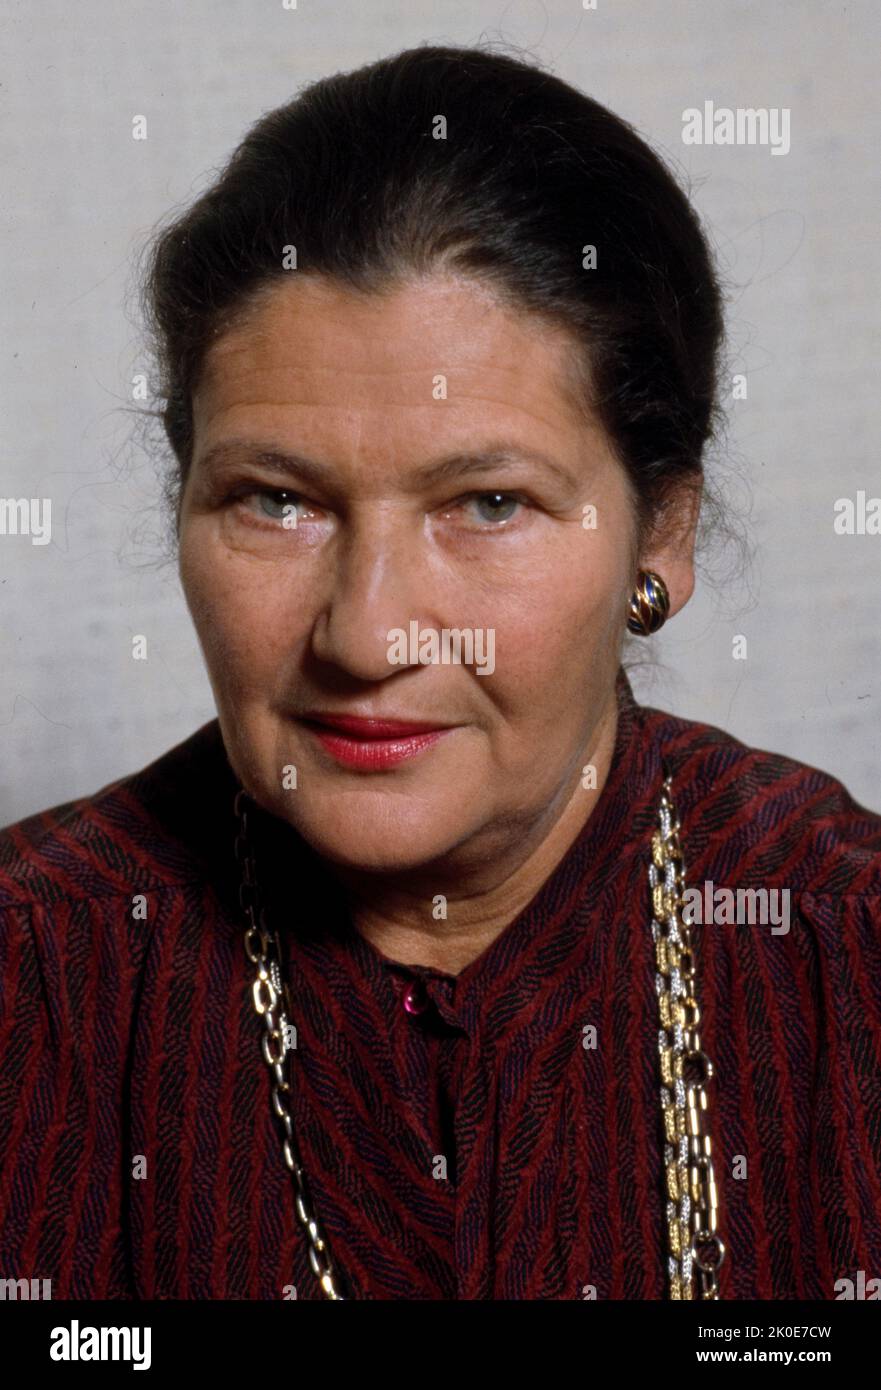 Simone Veil (1927 - 2017) French stateswoman who served as Health Minister in several governments and was President of the European Parliament from 1979 to 1982. As health minister, she is best remembered for advancing women's legal rights in France, in particular for the 1975 law that legalized abortion. Stock Photo